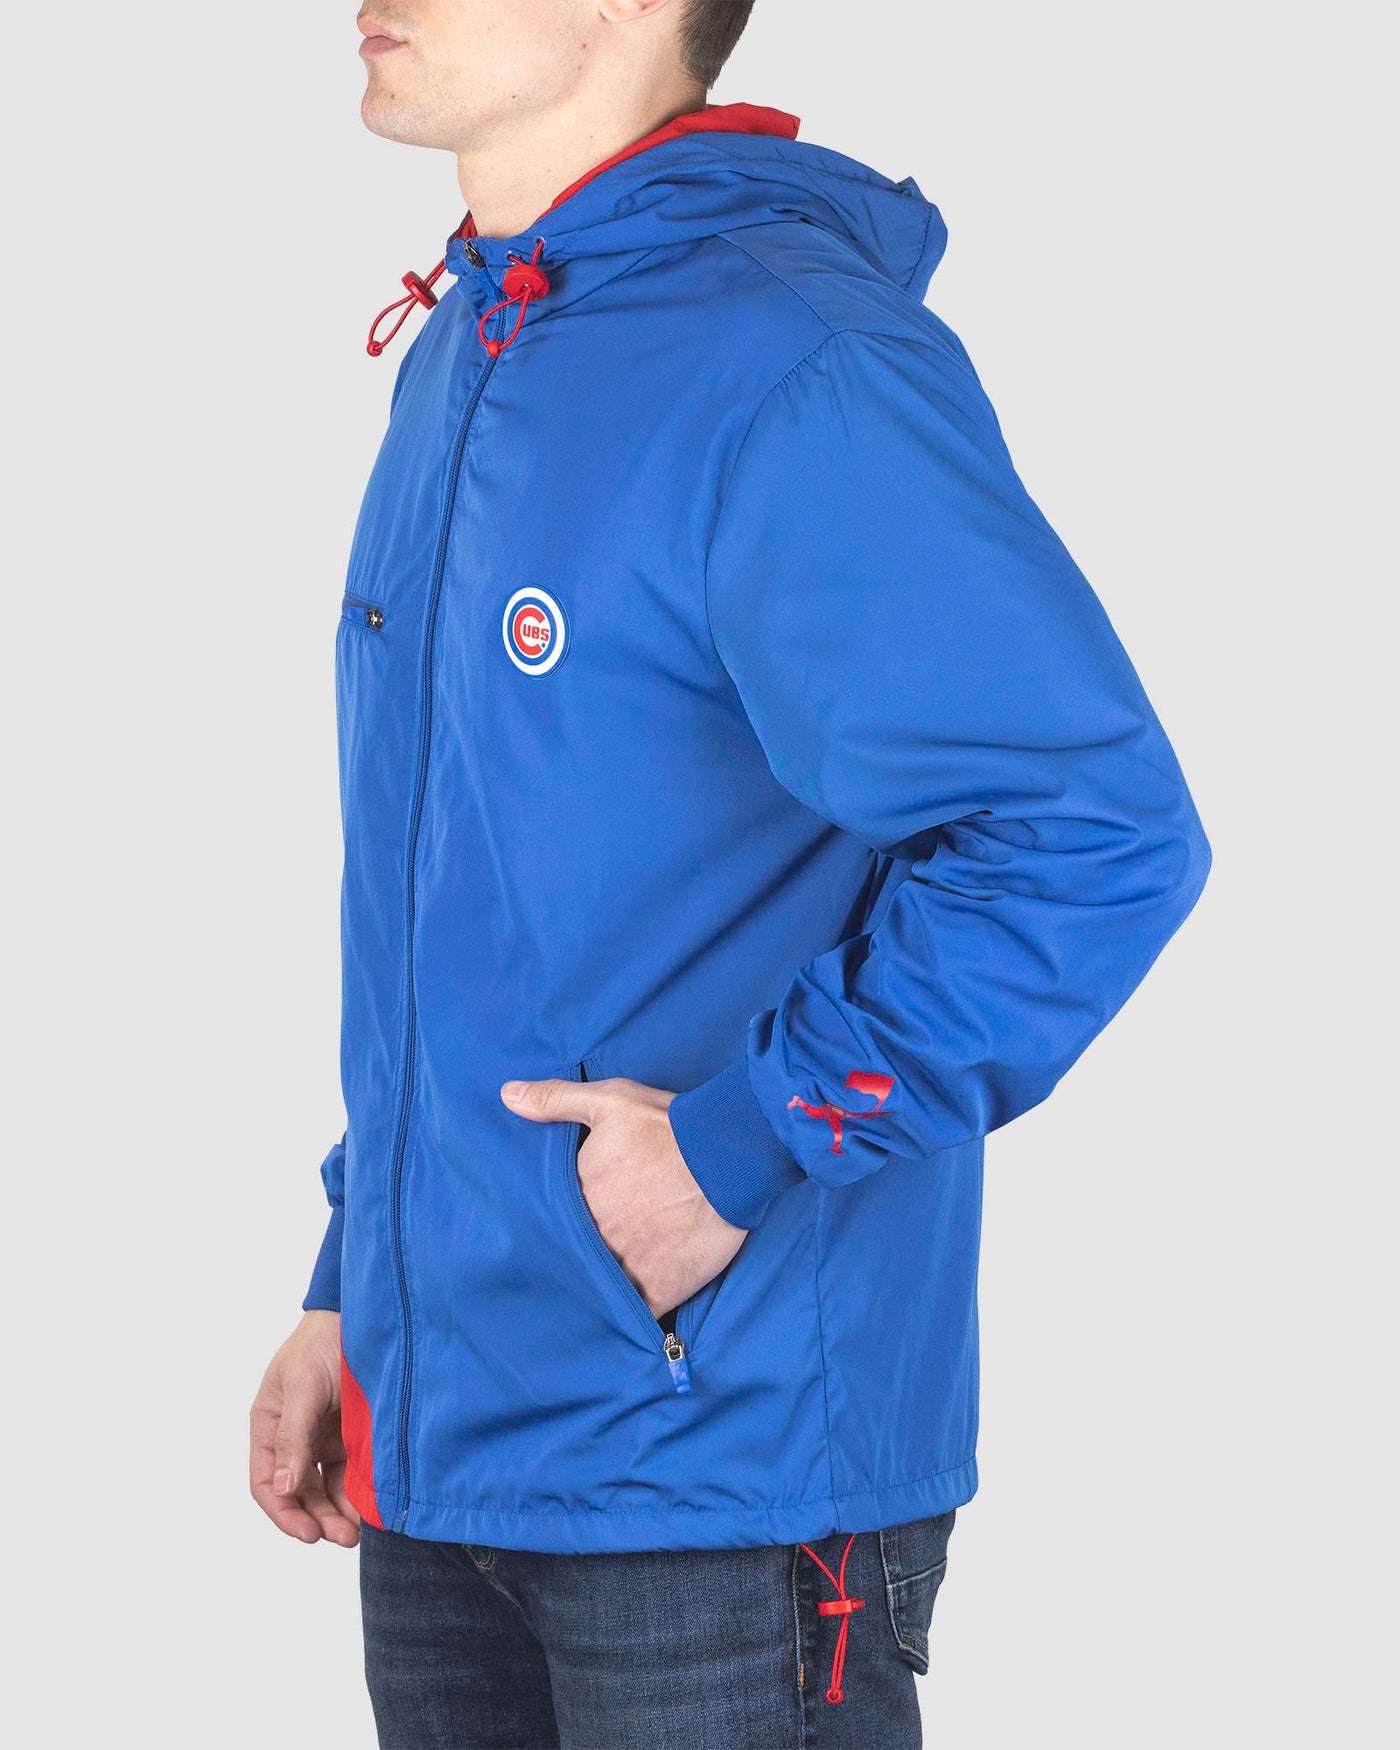 For Love Windbreaker - Chicago Cubs